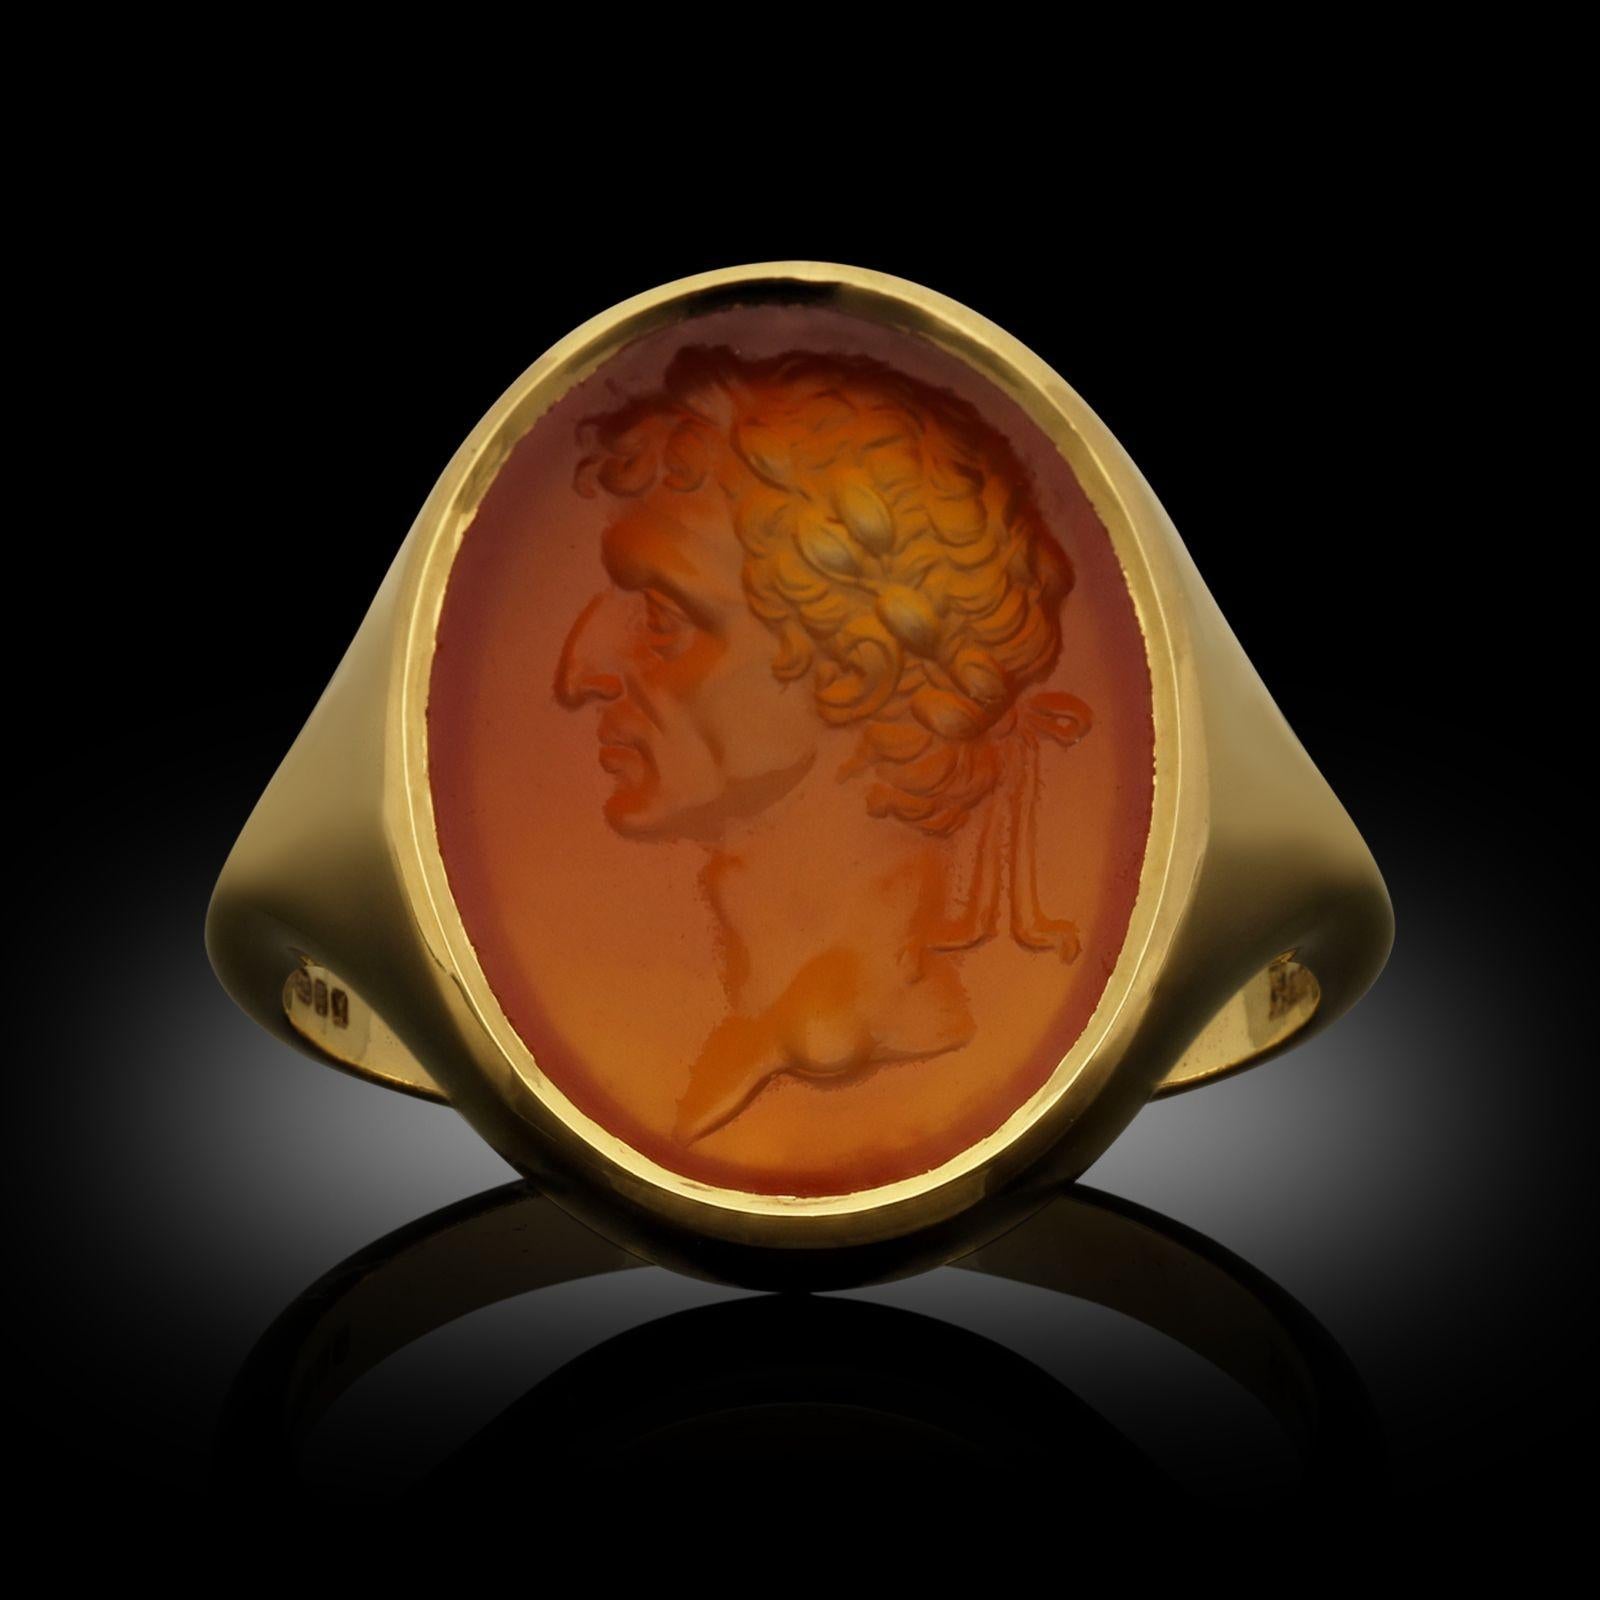 A gold and carnelian signet ring by Hancocks, the classic oval shaped signet ring handmade in 22ct yellow gold and set with an antique oval carnelian intaglio circa 1840 engraved with the profile of Roman general Julius Caesar, bezel set into the